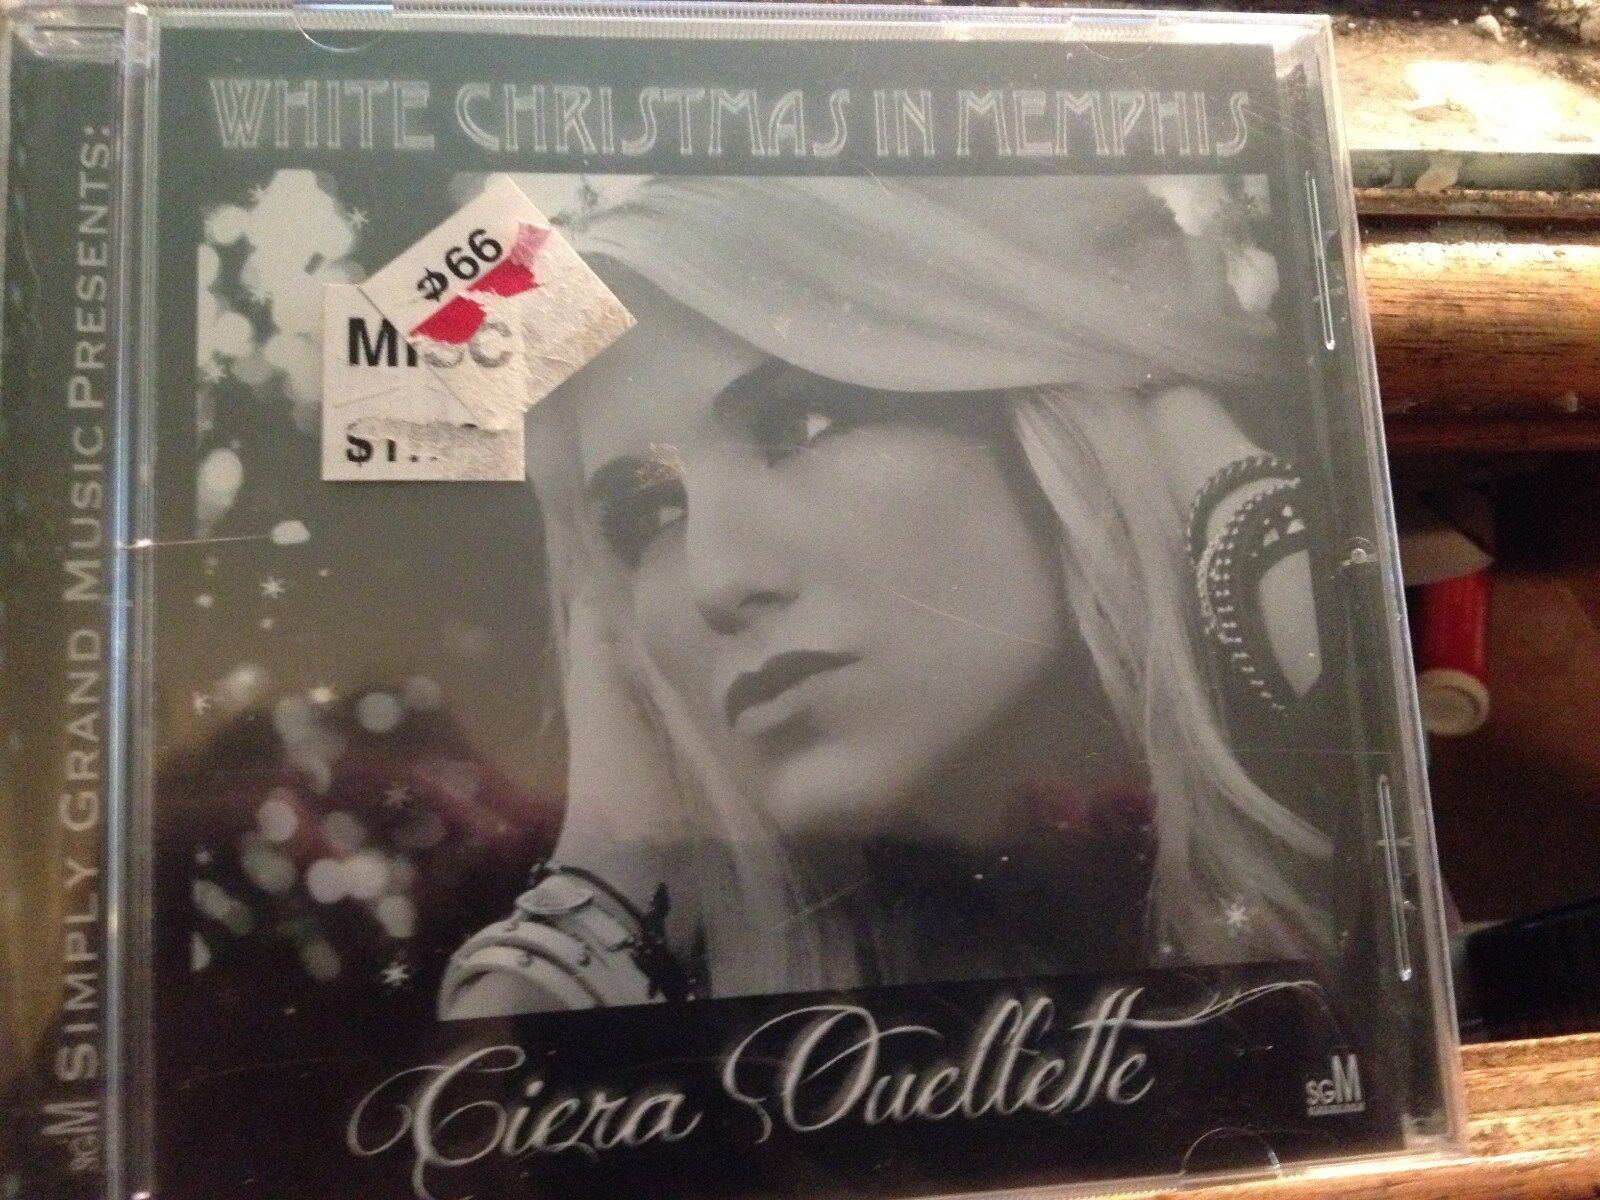 White Christmas in MemphisCD SEALED CIERA OULLETTE RARE